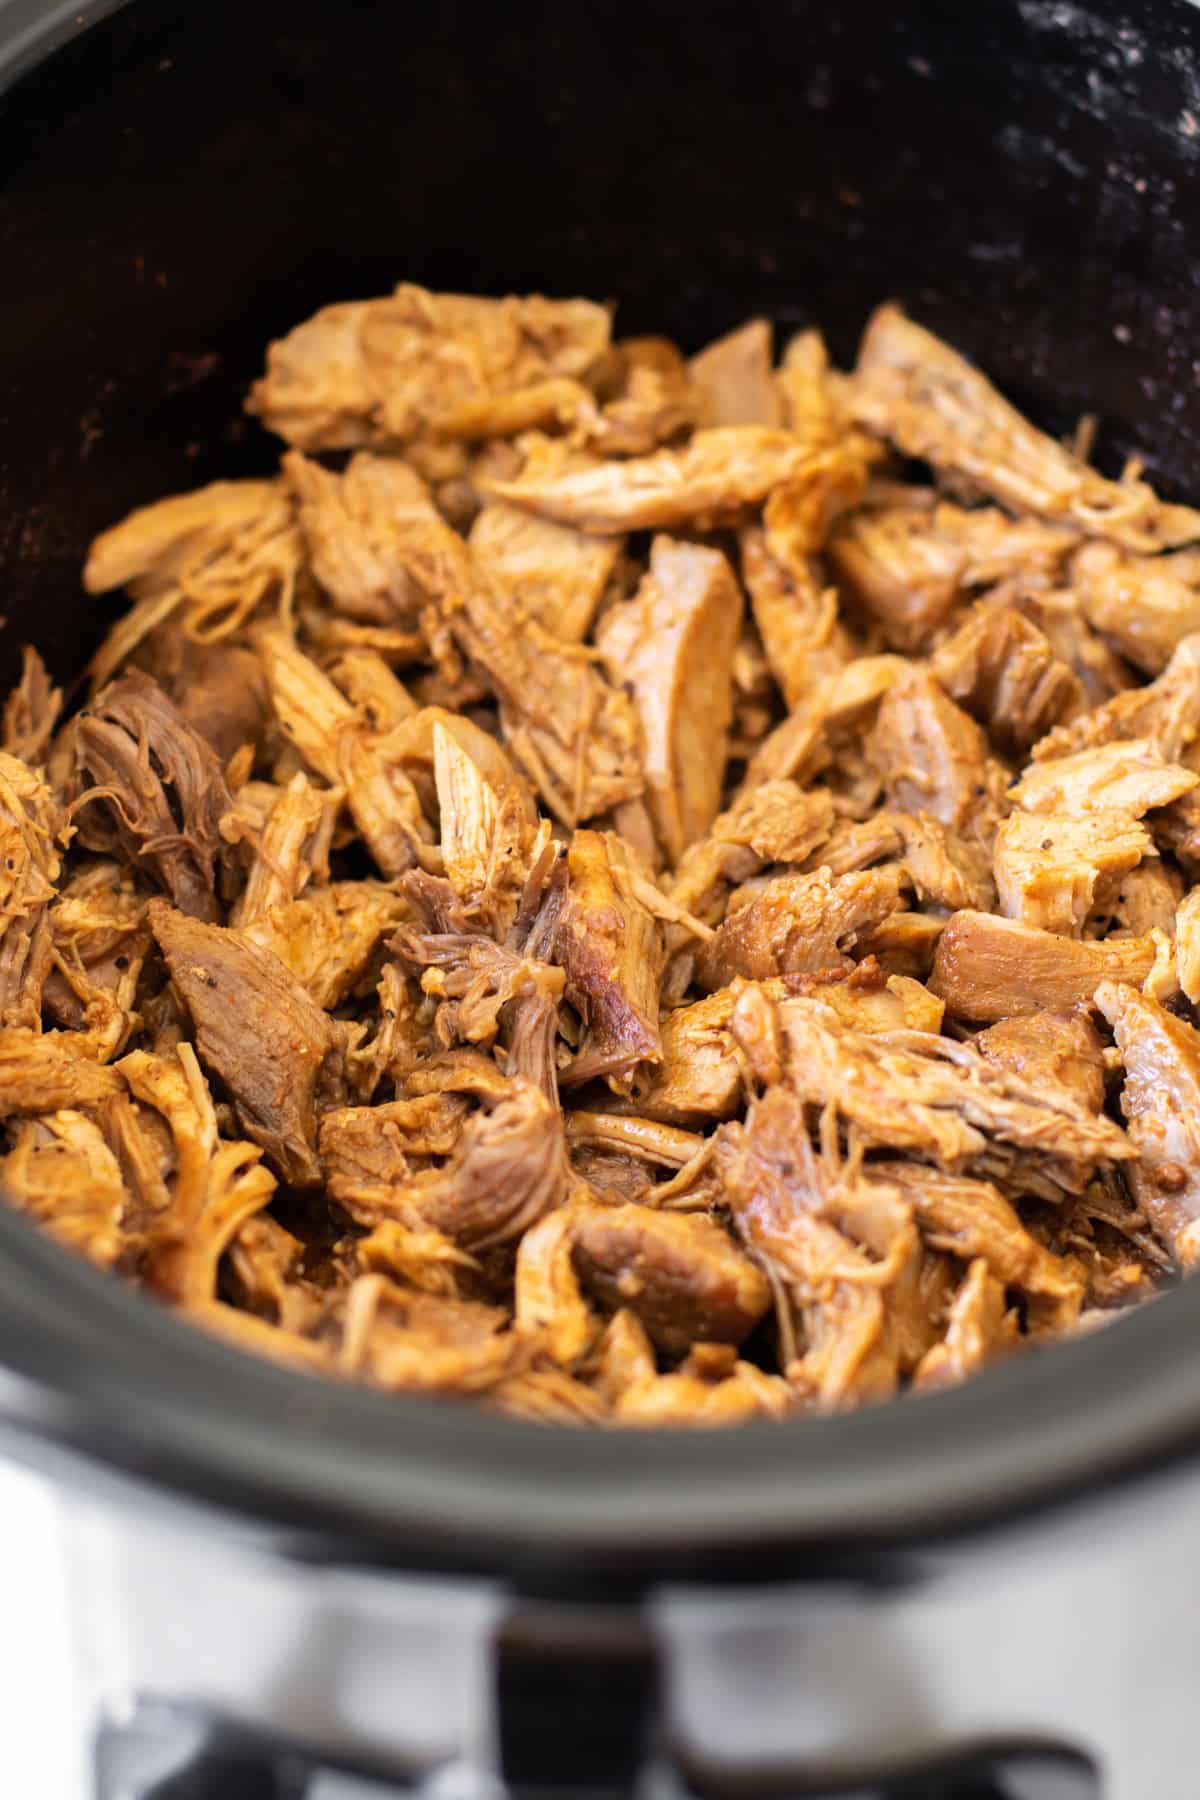 pulled pork in a slow cooker.